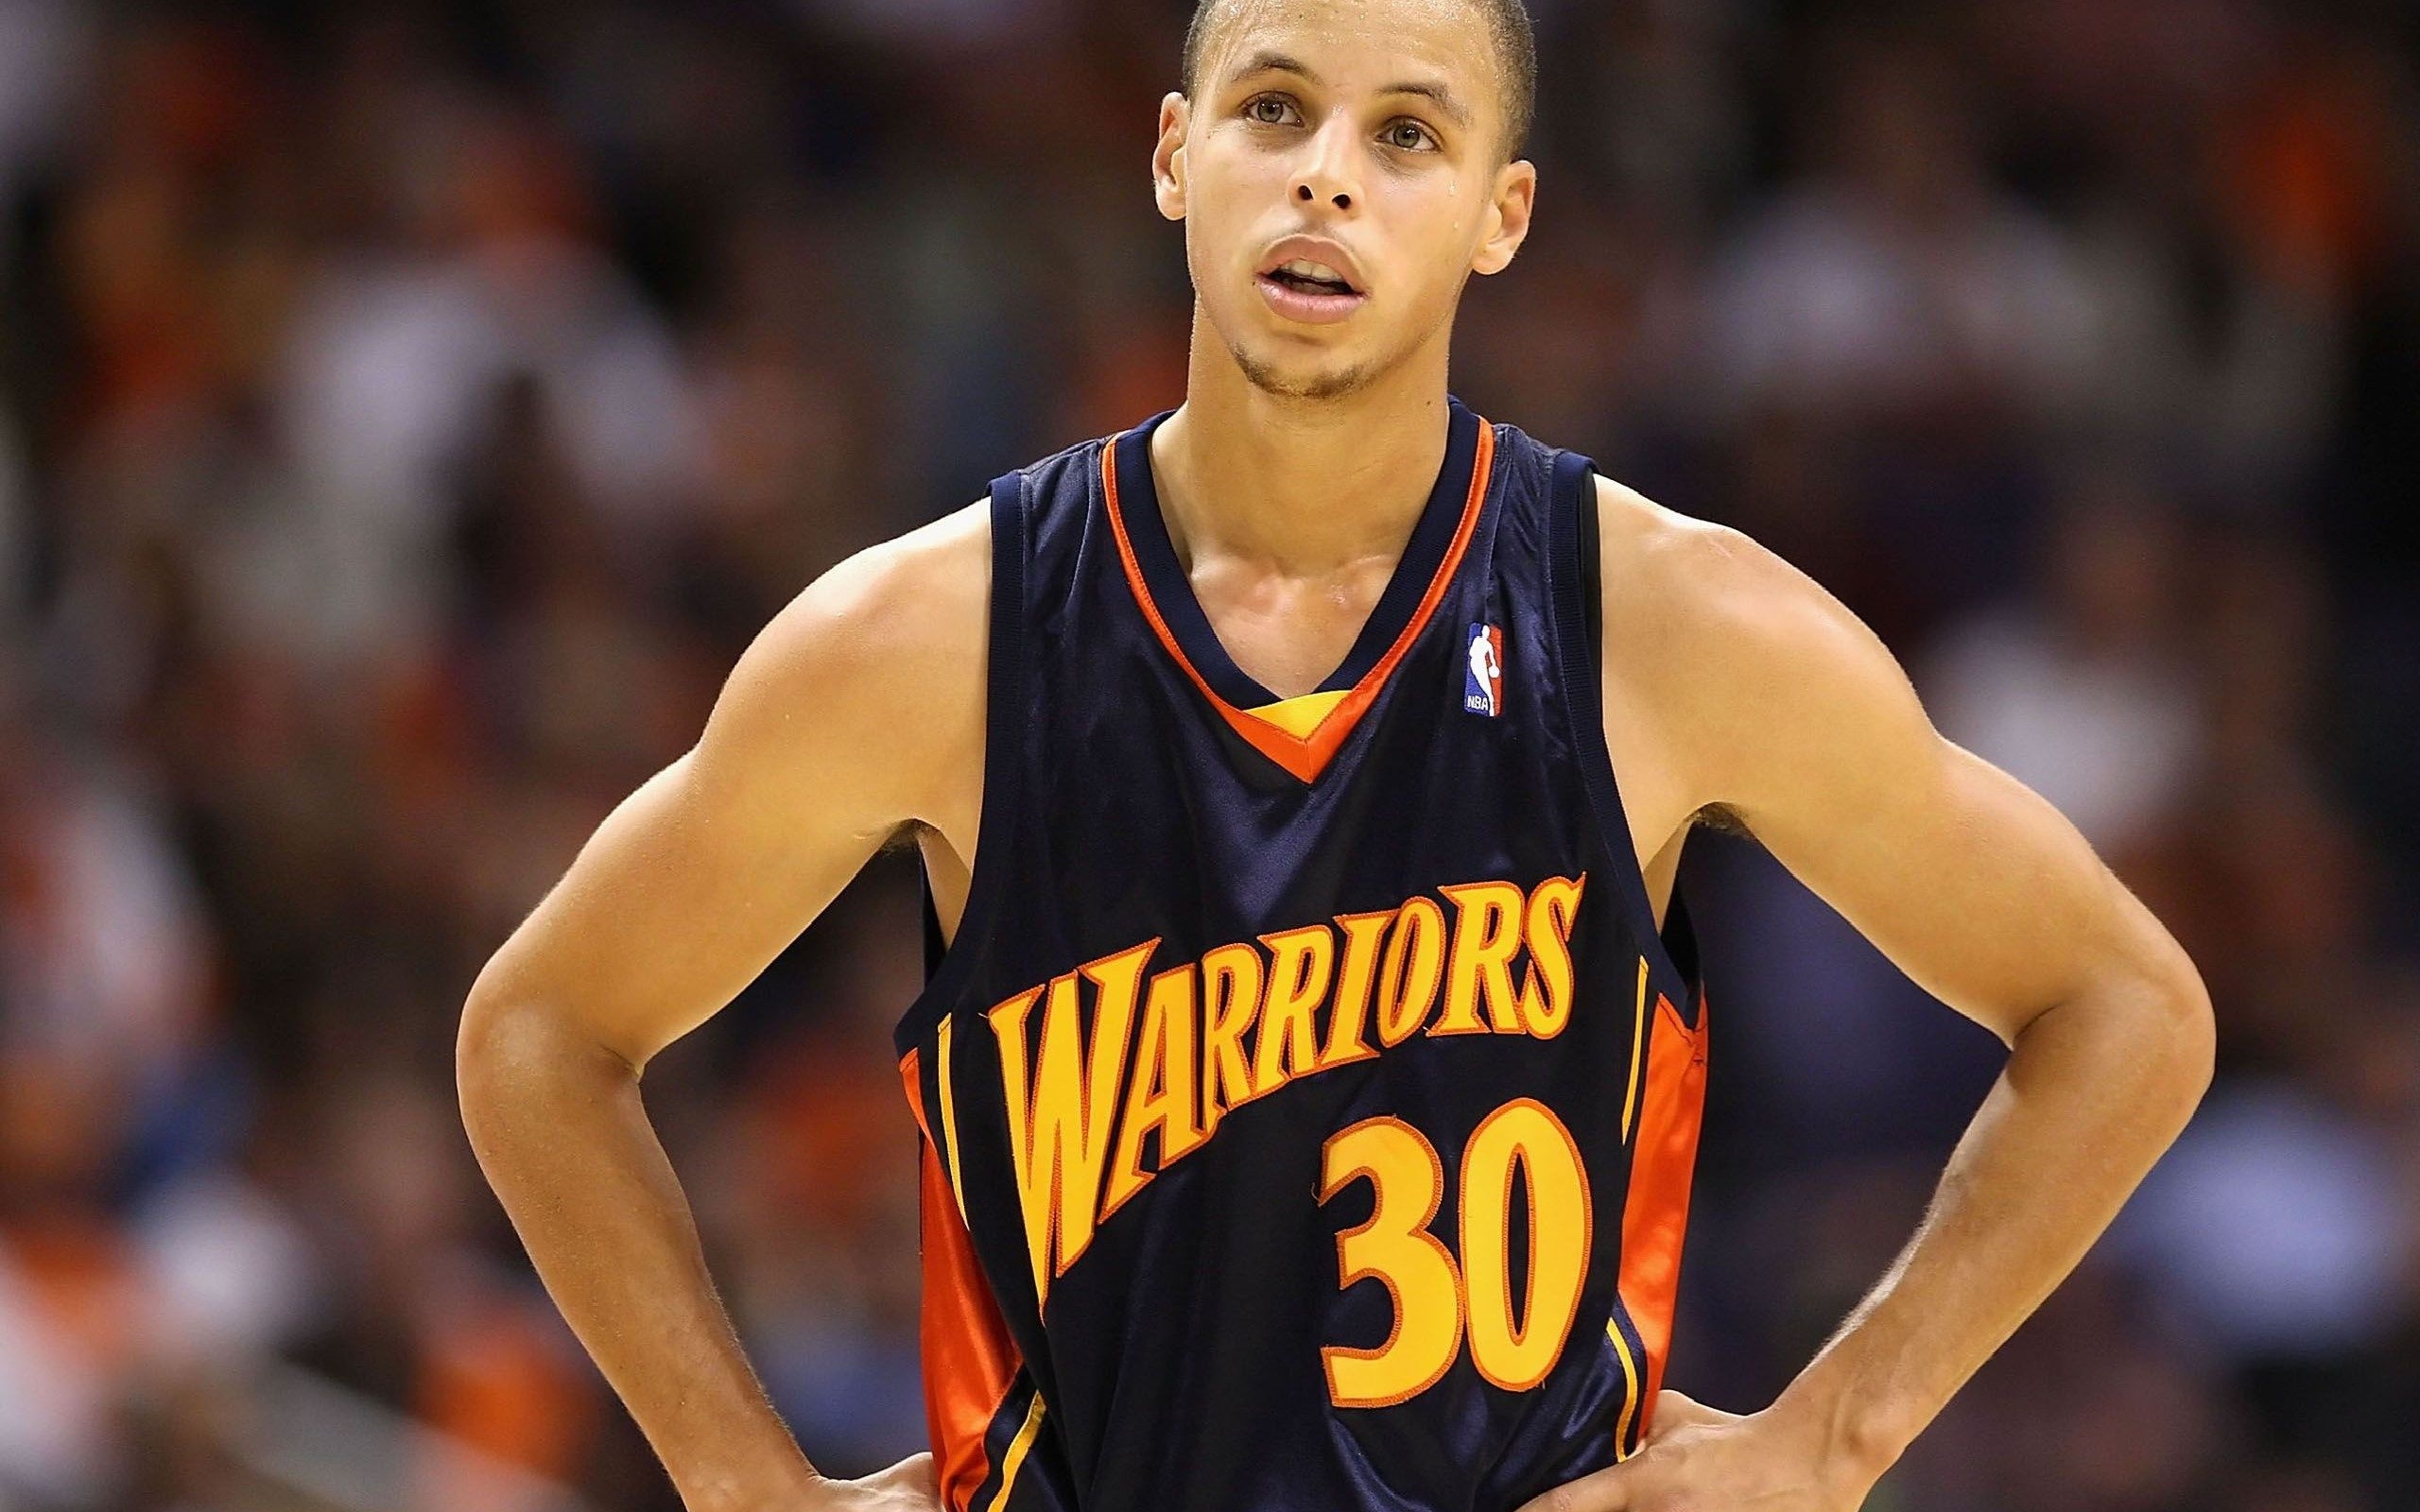 download stephen curry nba live mobile